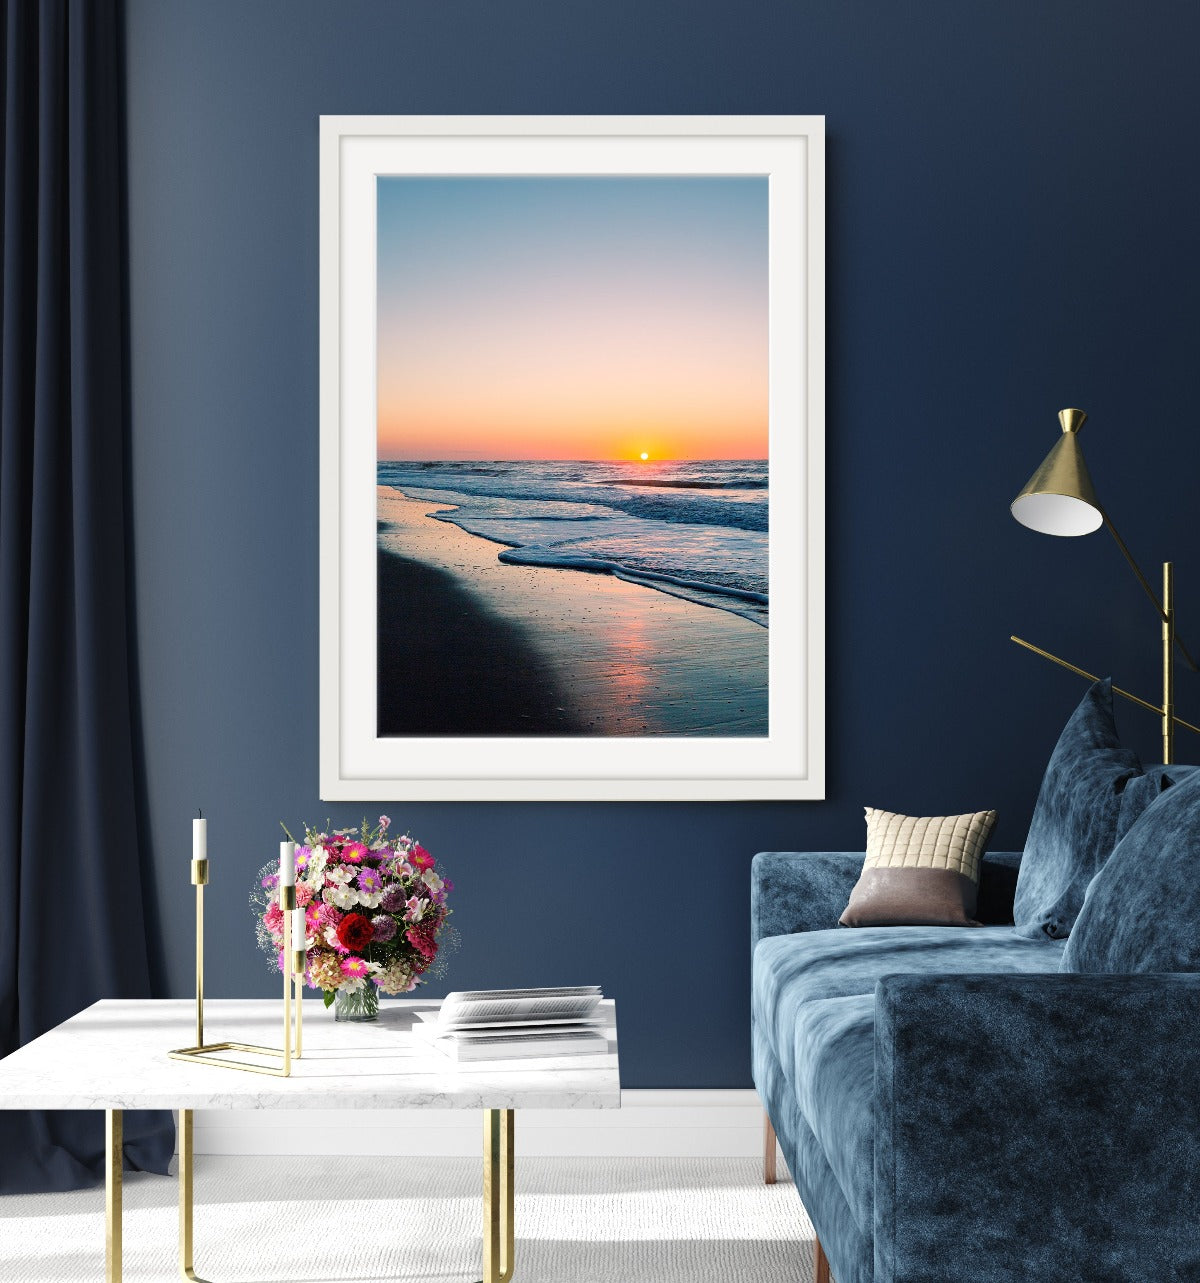 modern living room decor, colorful framed beach wall art photograph by Wright and Roam